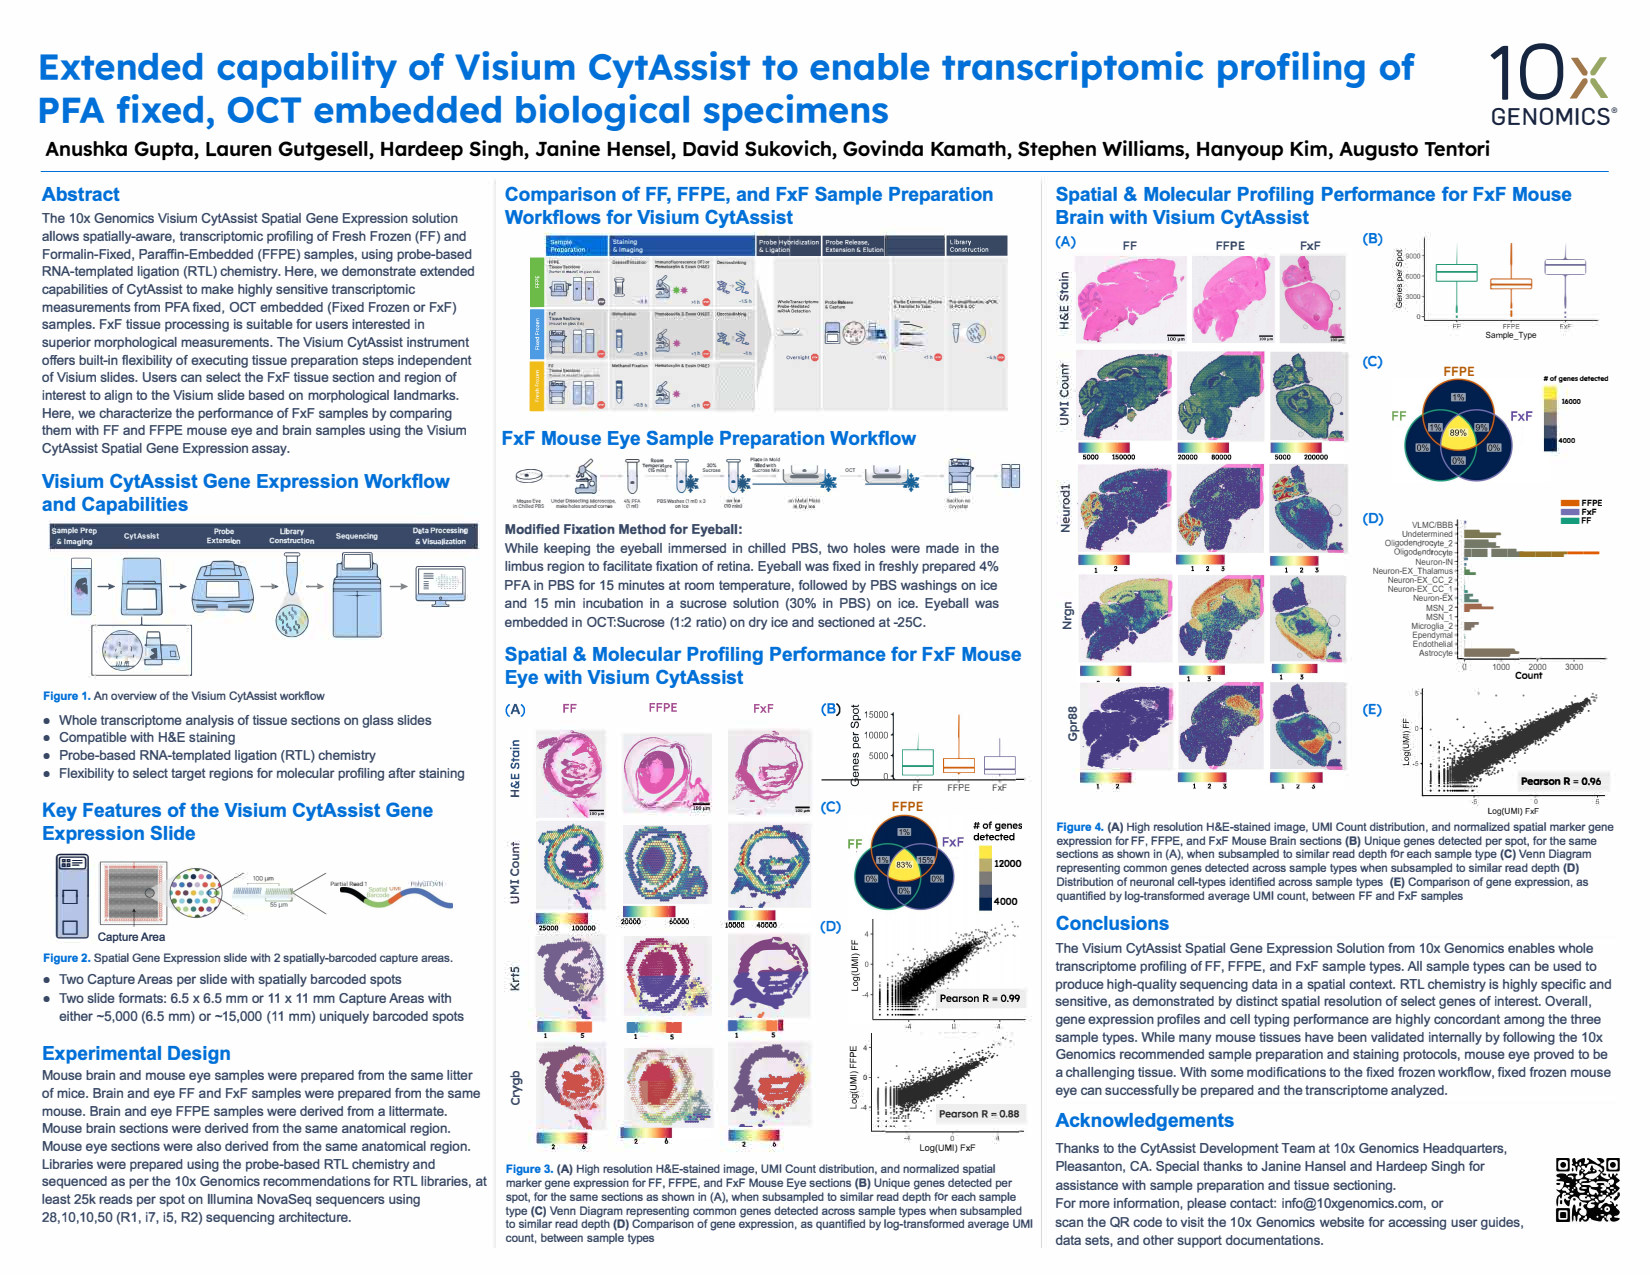 Extended capability of Visium CytAssist to enable transcriptomic profiling of PFA fixed, OCT embedded biological specimens